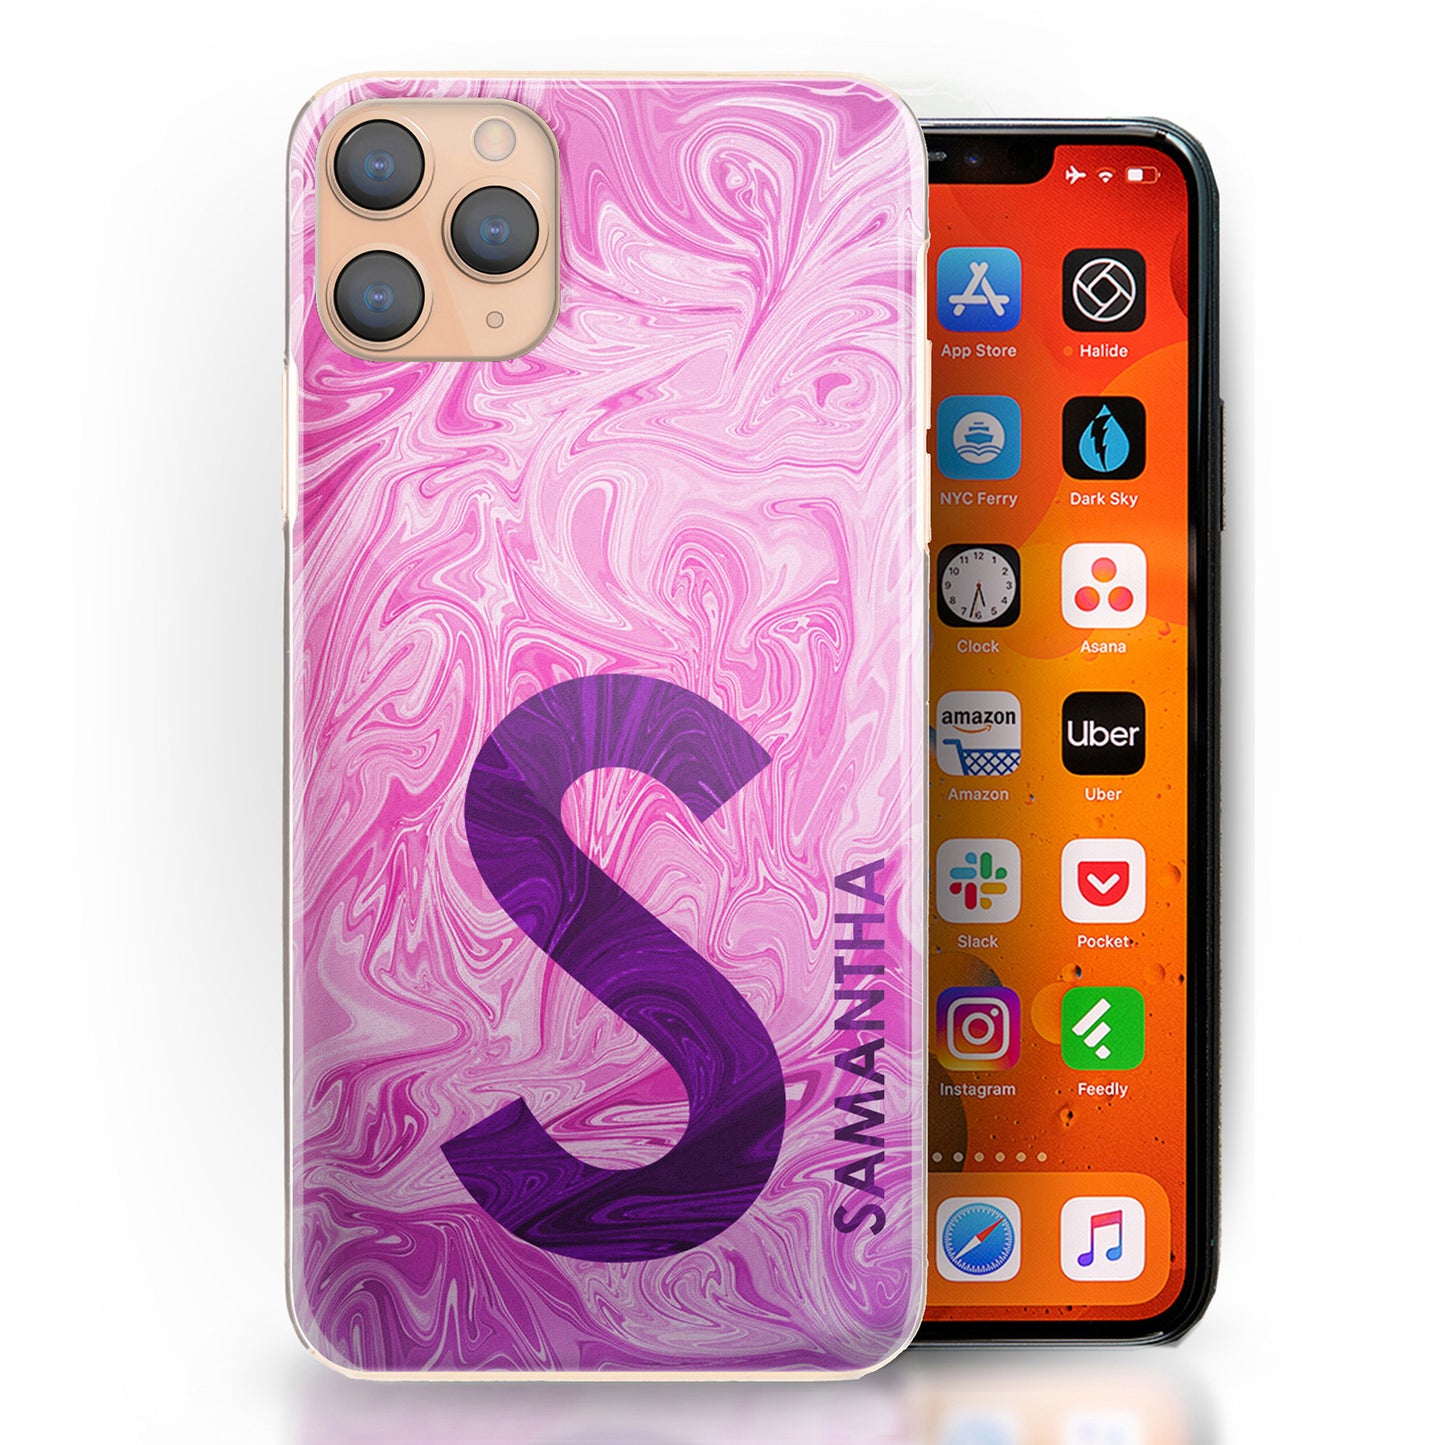 Personalised Motorola Phone Hard Case with Purple Text and Initial on Pink Swirled Marble